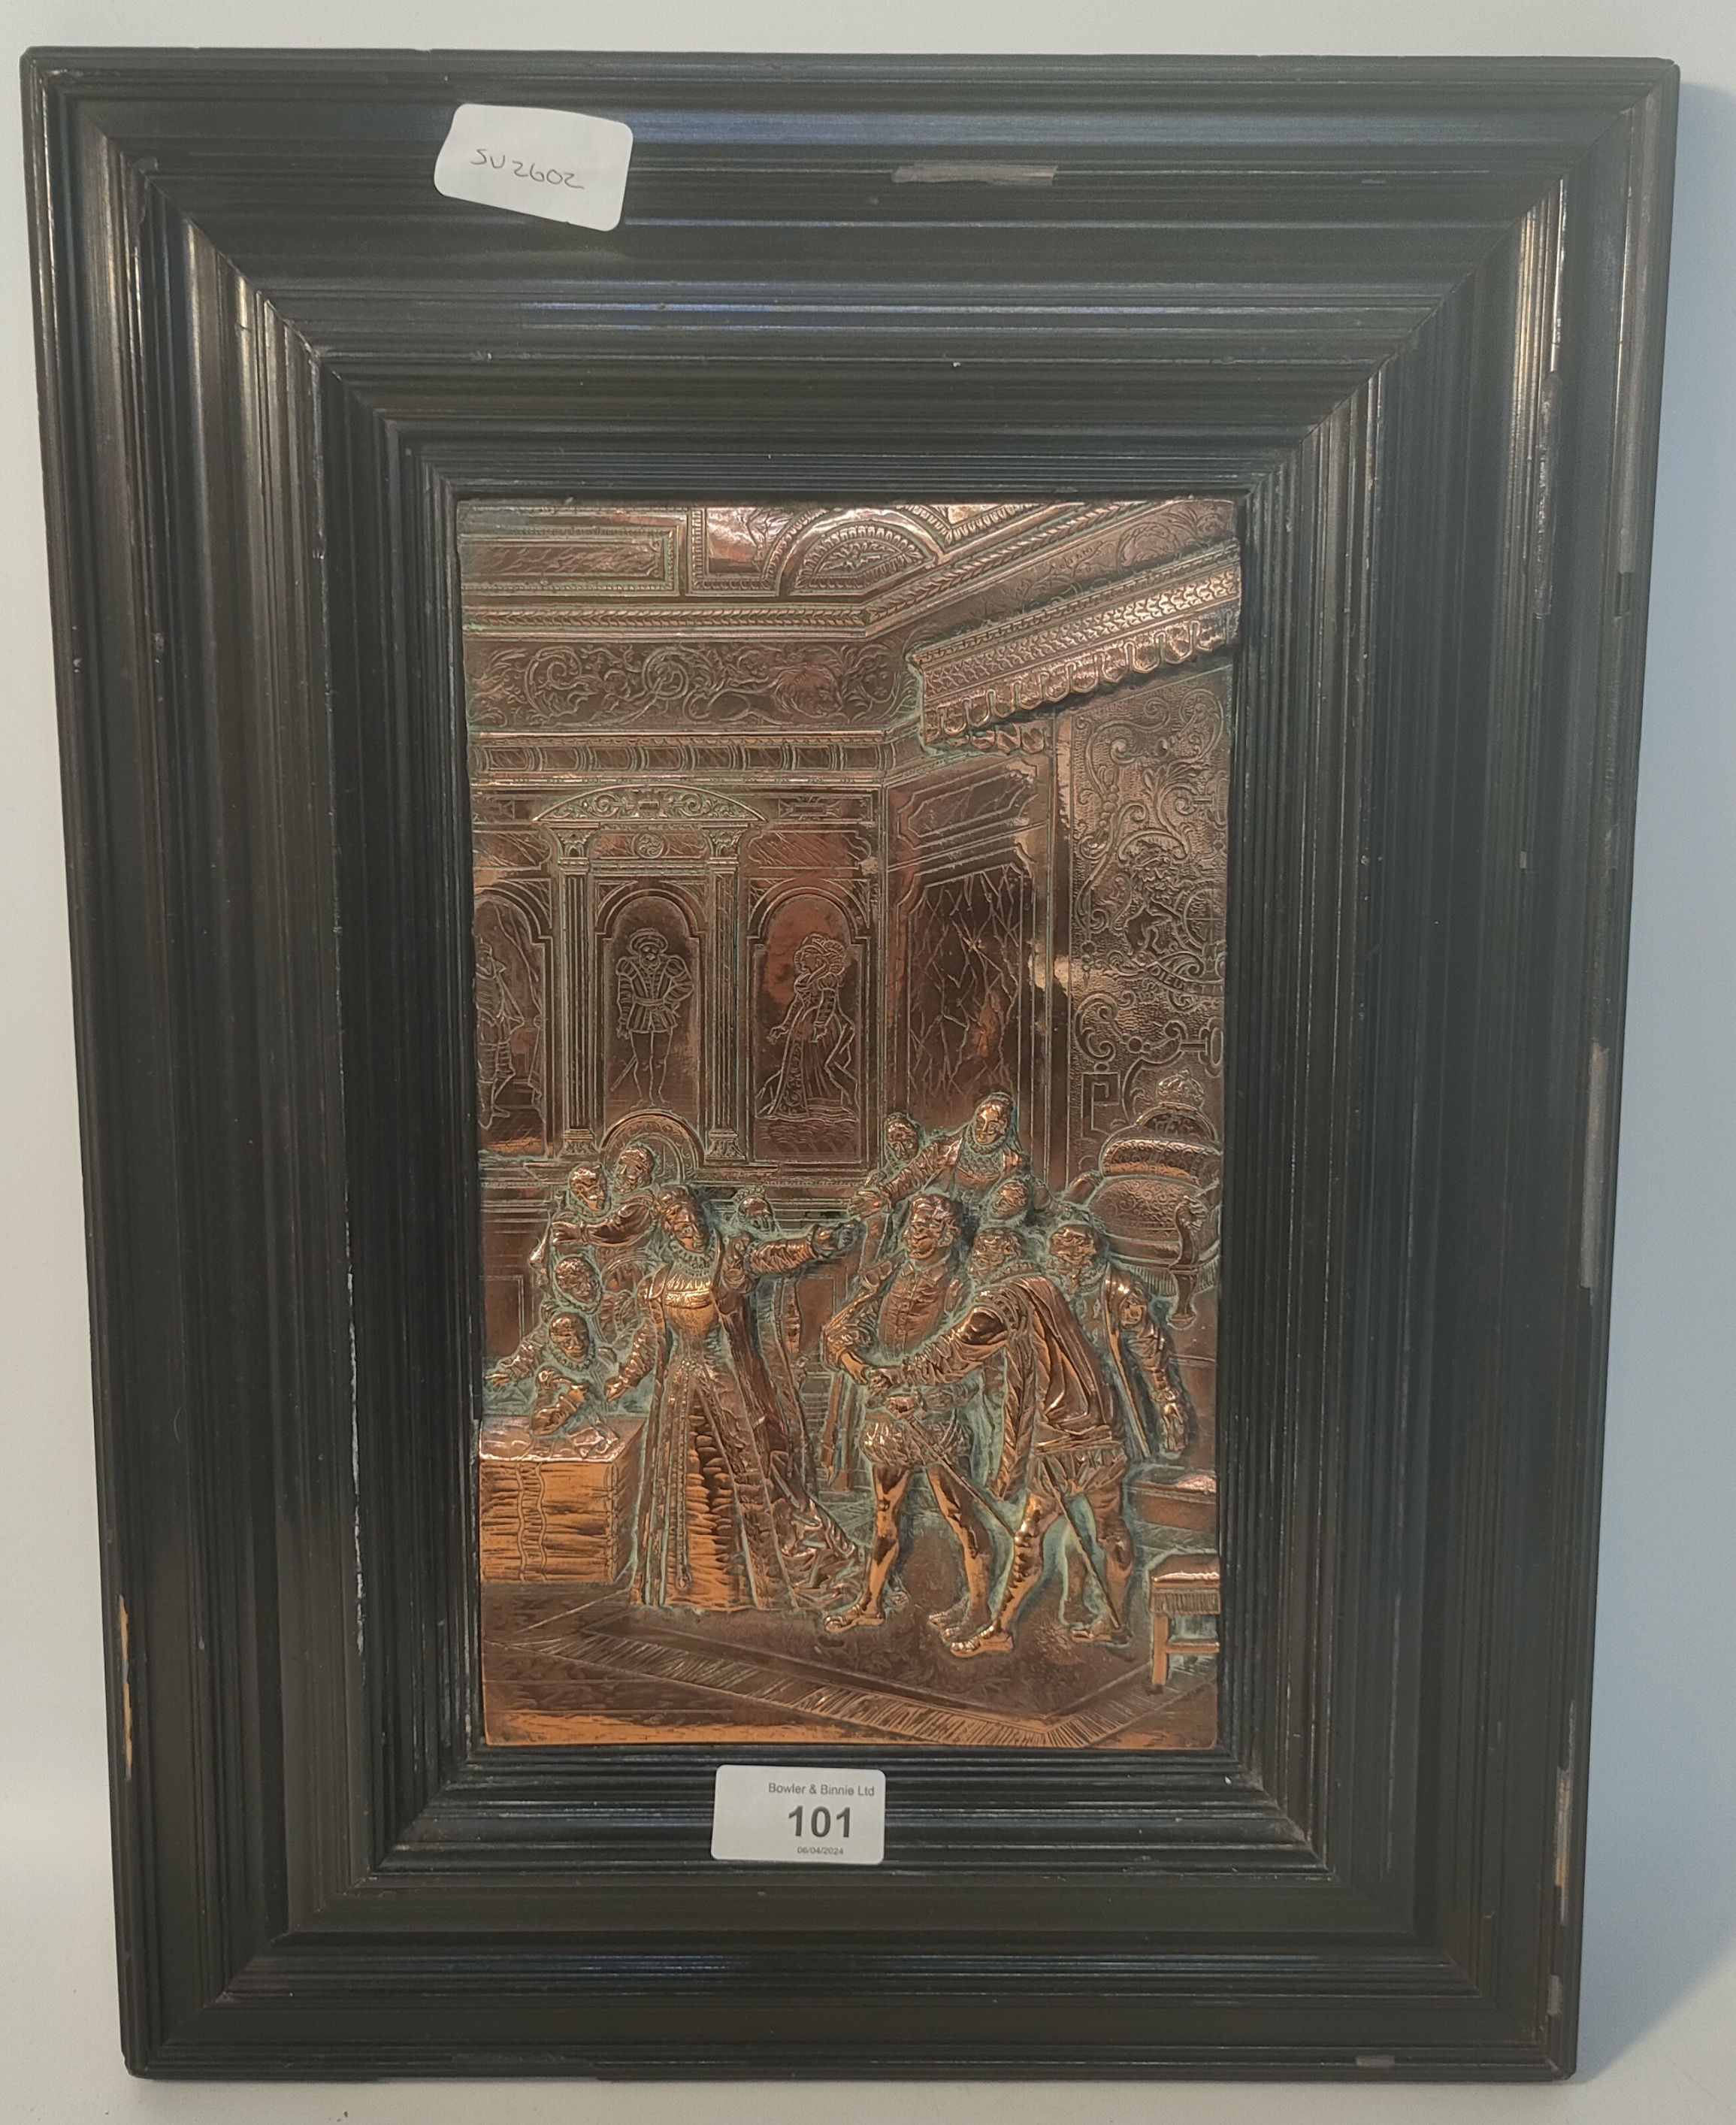 19th century copper relief of Queen Mary of Scots & swordsman set in blackened frame [34.5x45cm]